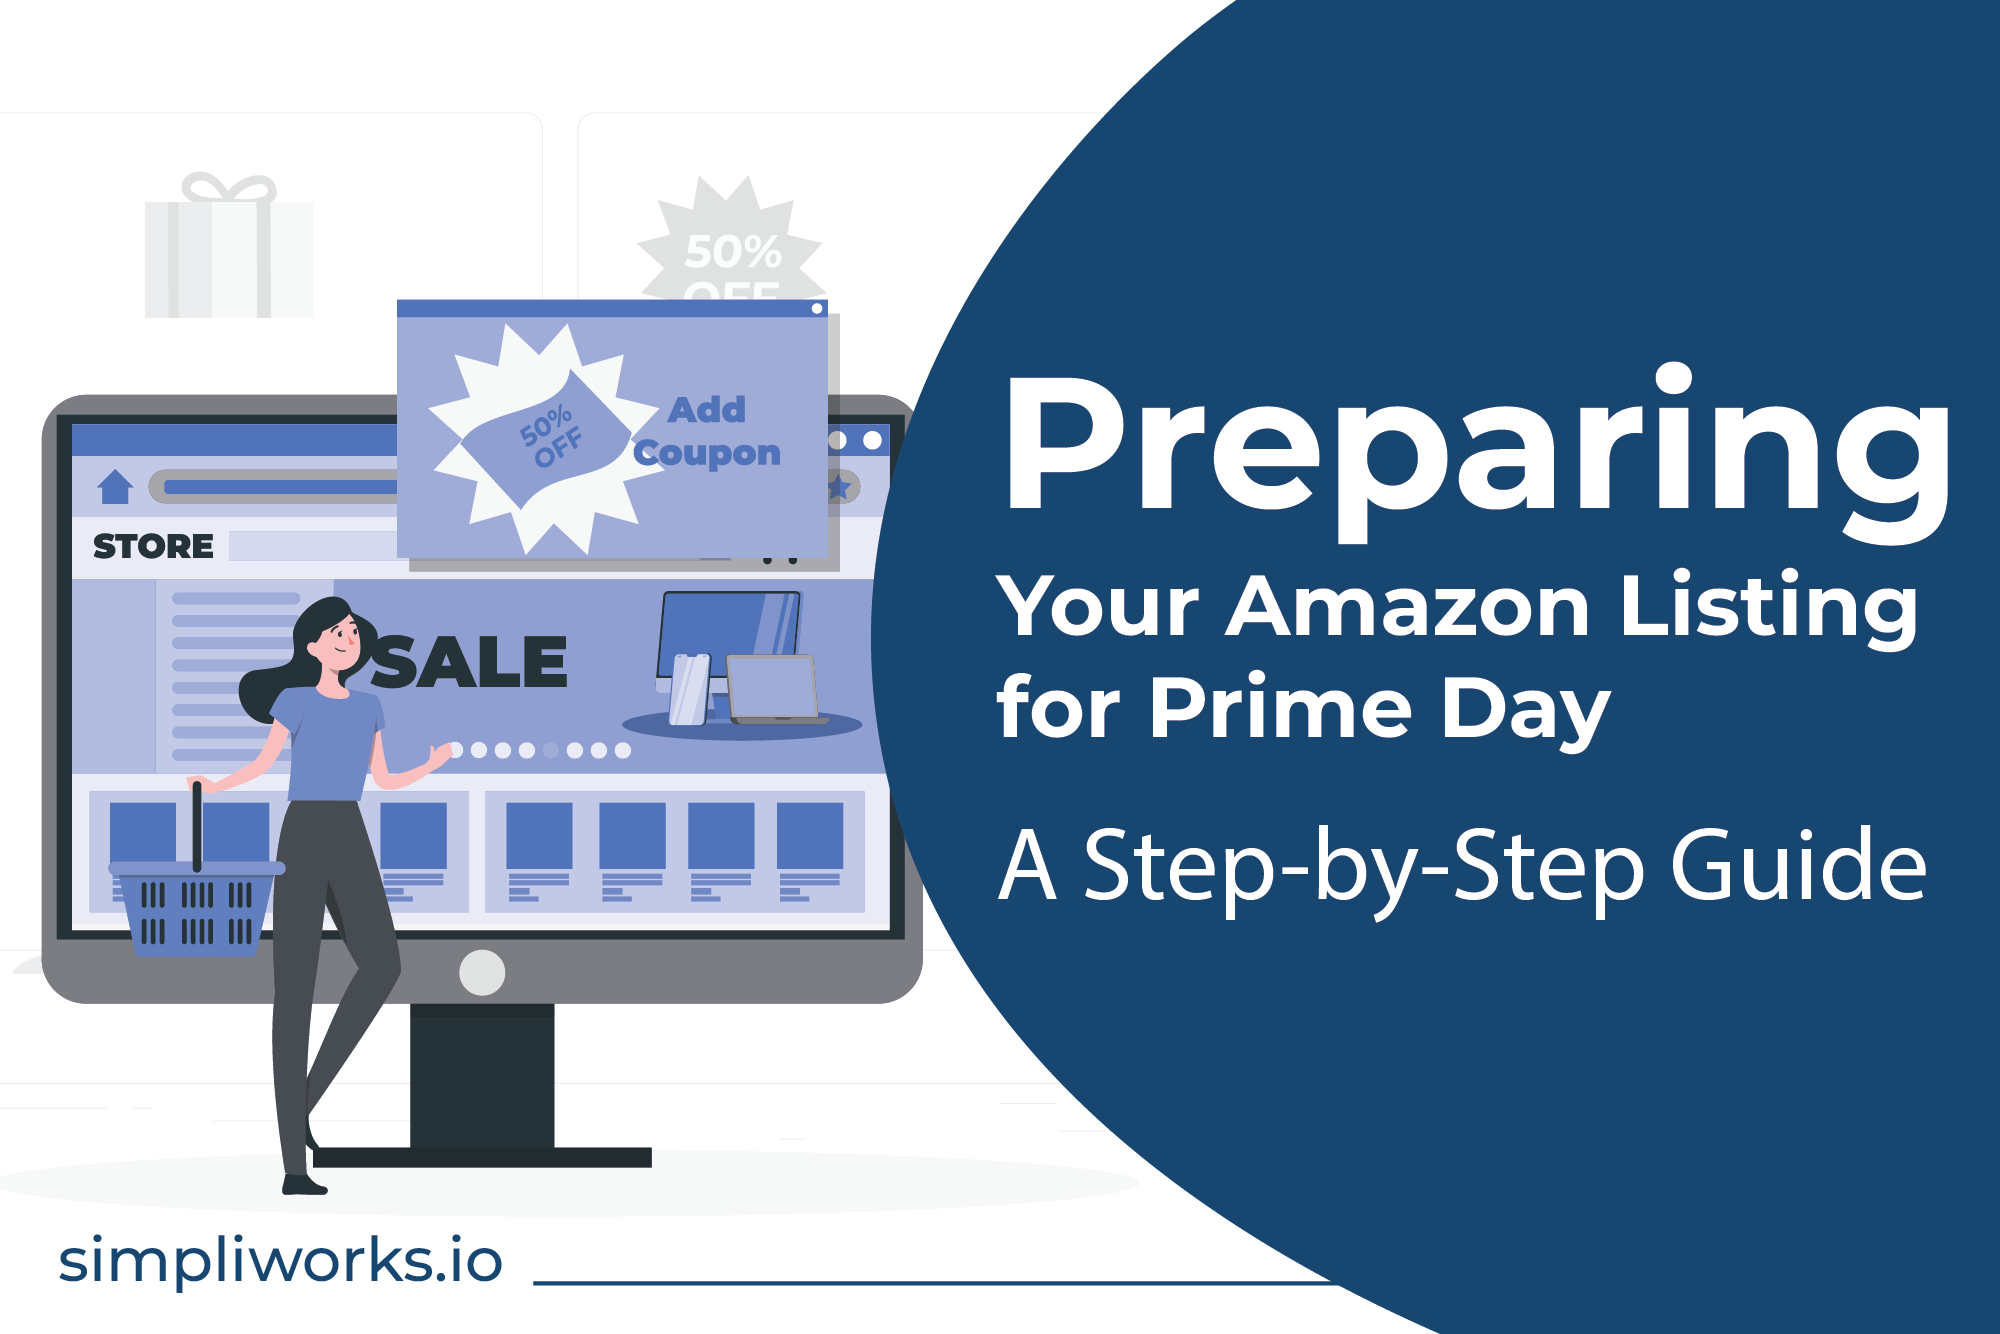 Preparing Your Amazon Listing for Prime Day